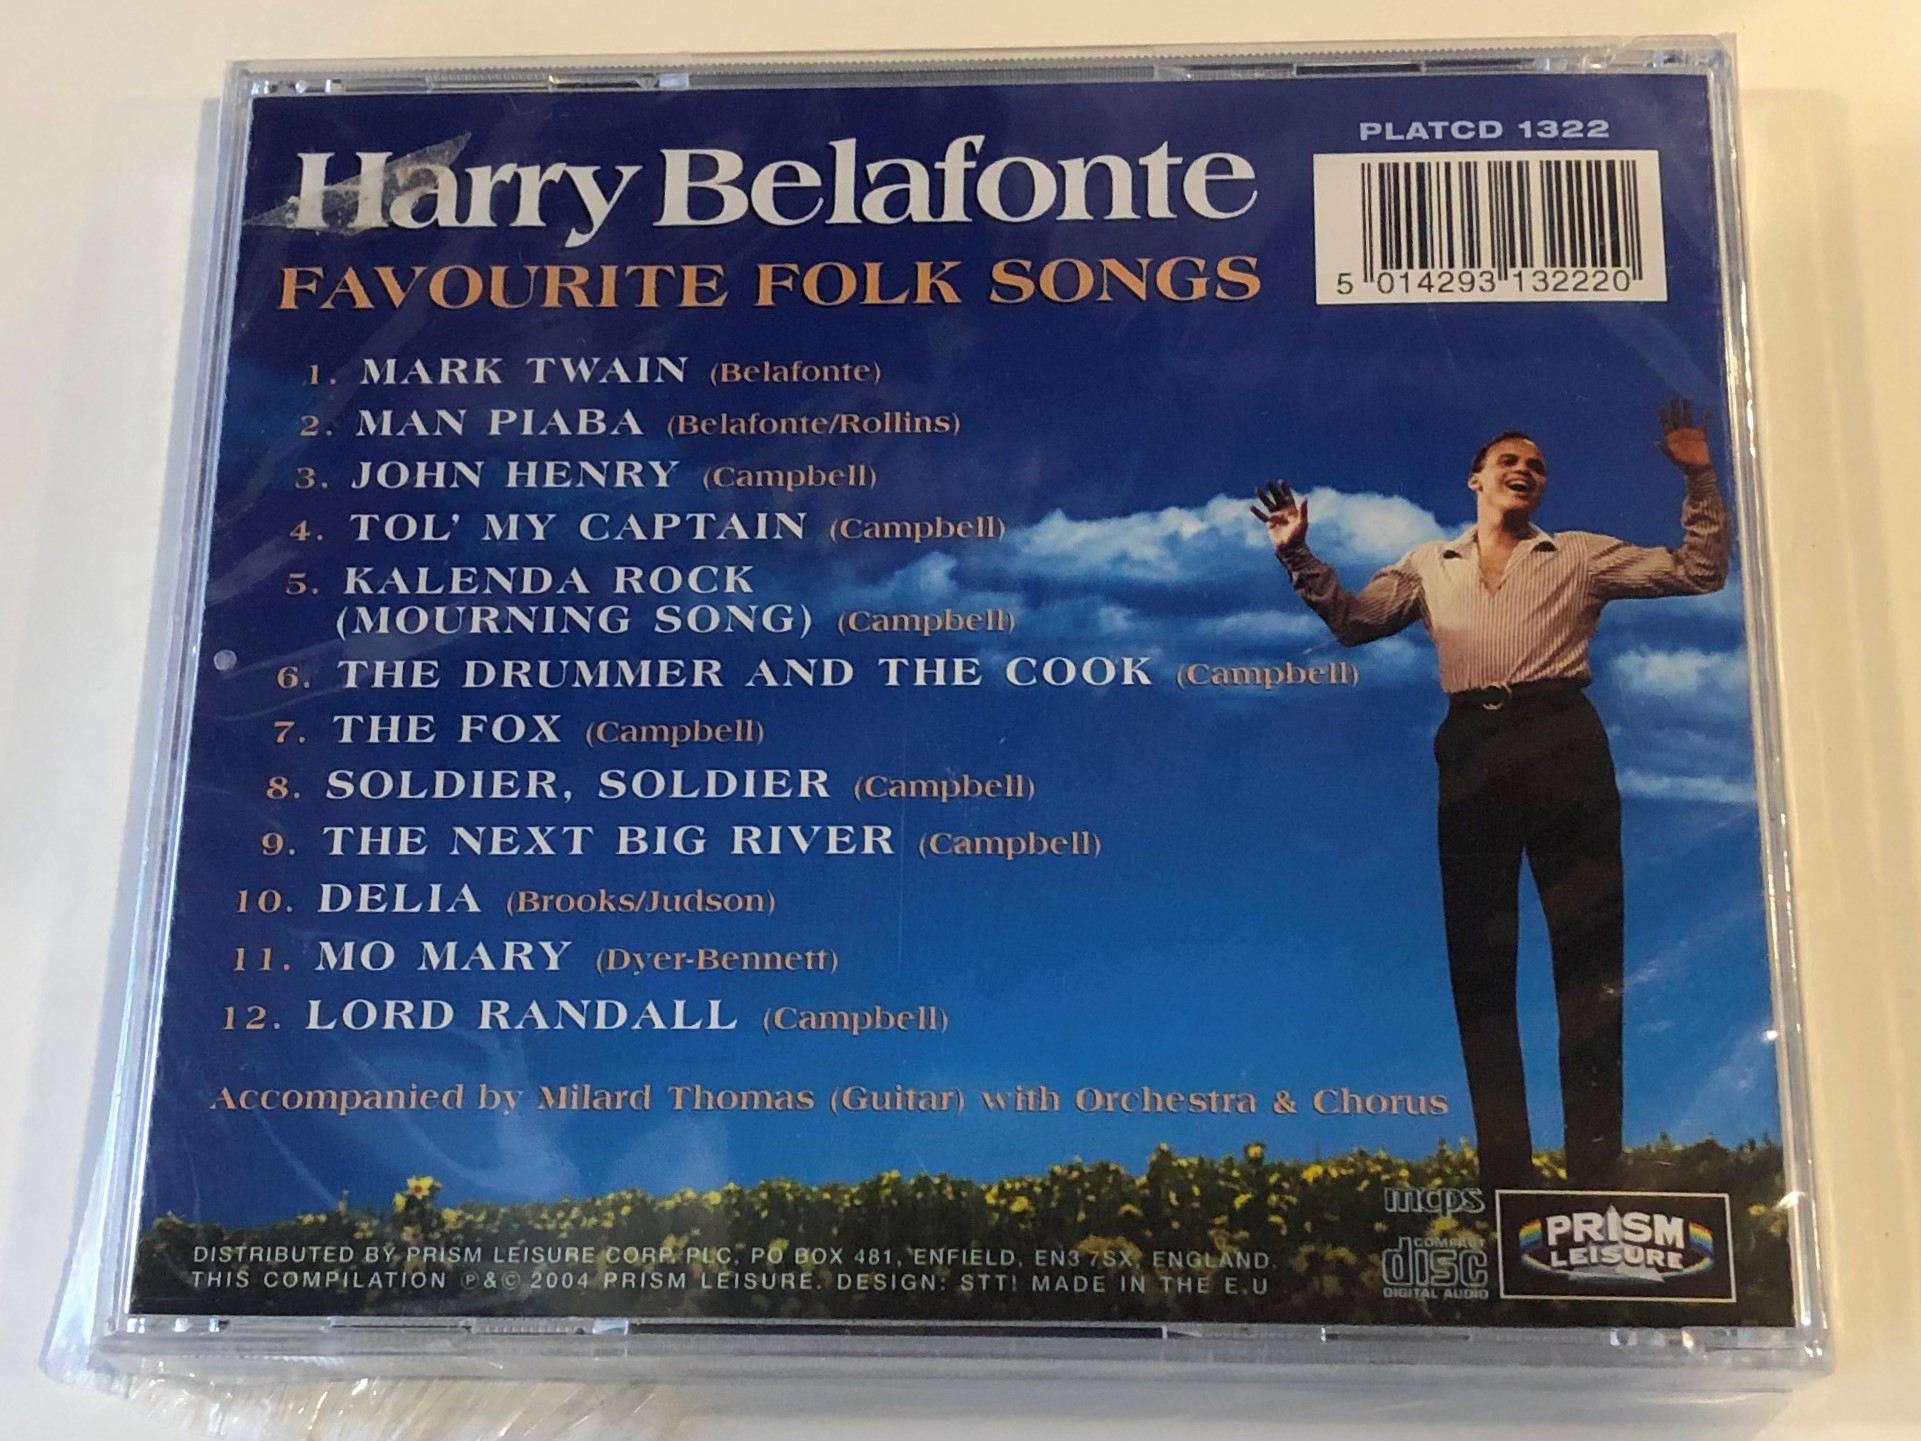 harry-belafonte-favorite-folk-songs-including-john-henry-soldier-soldier-mark-twain-the-fox-the-drummer-and-the-cook-prism-leisure-audio-cd-2004-platcd-1322-2-.jpg